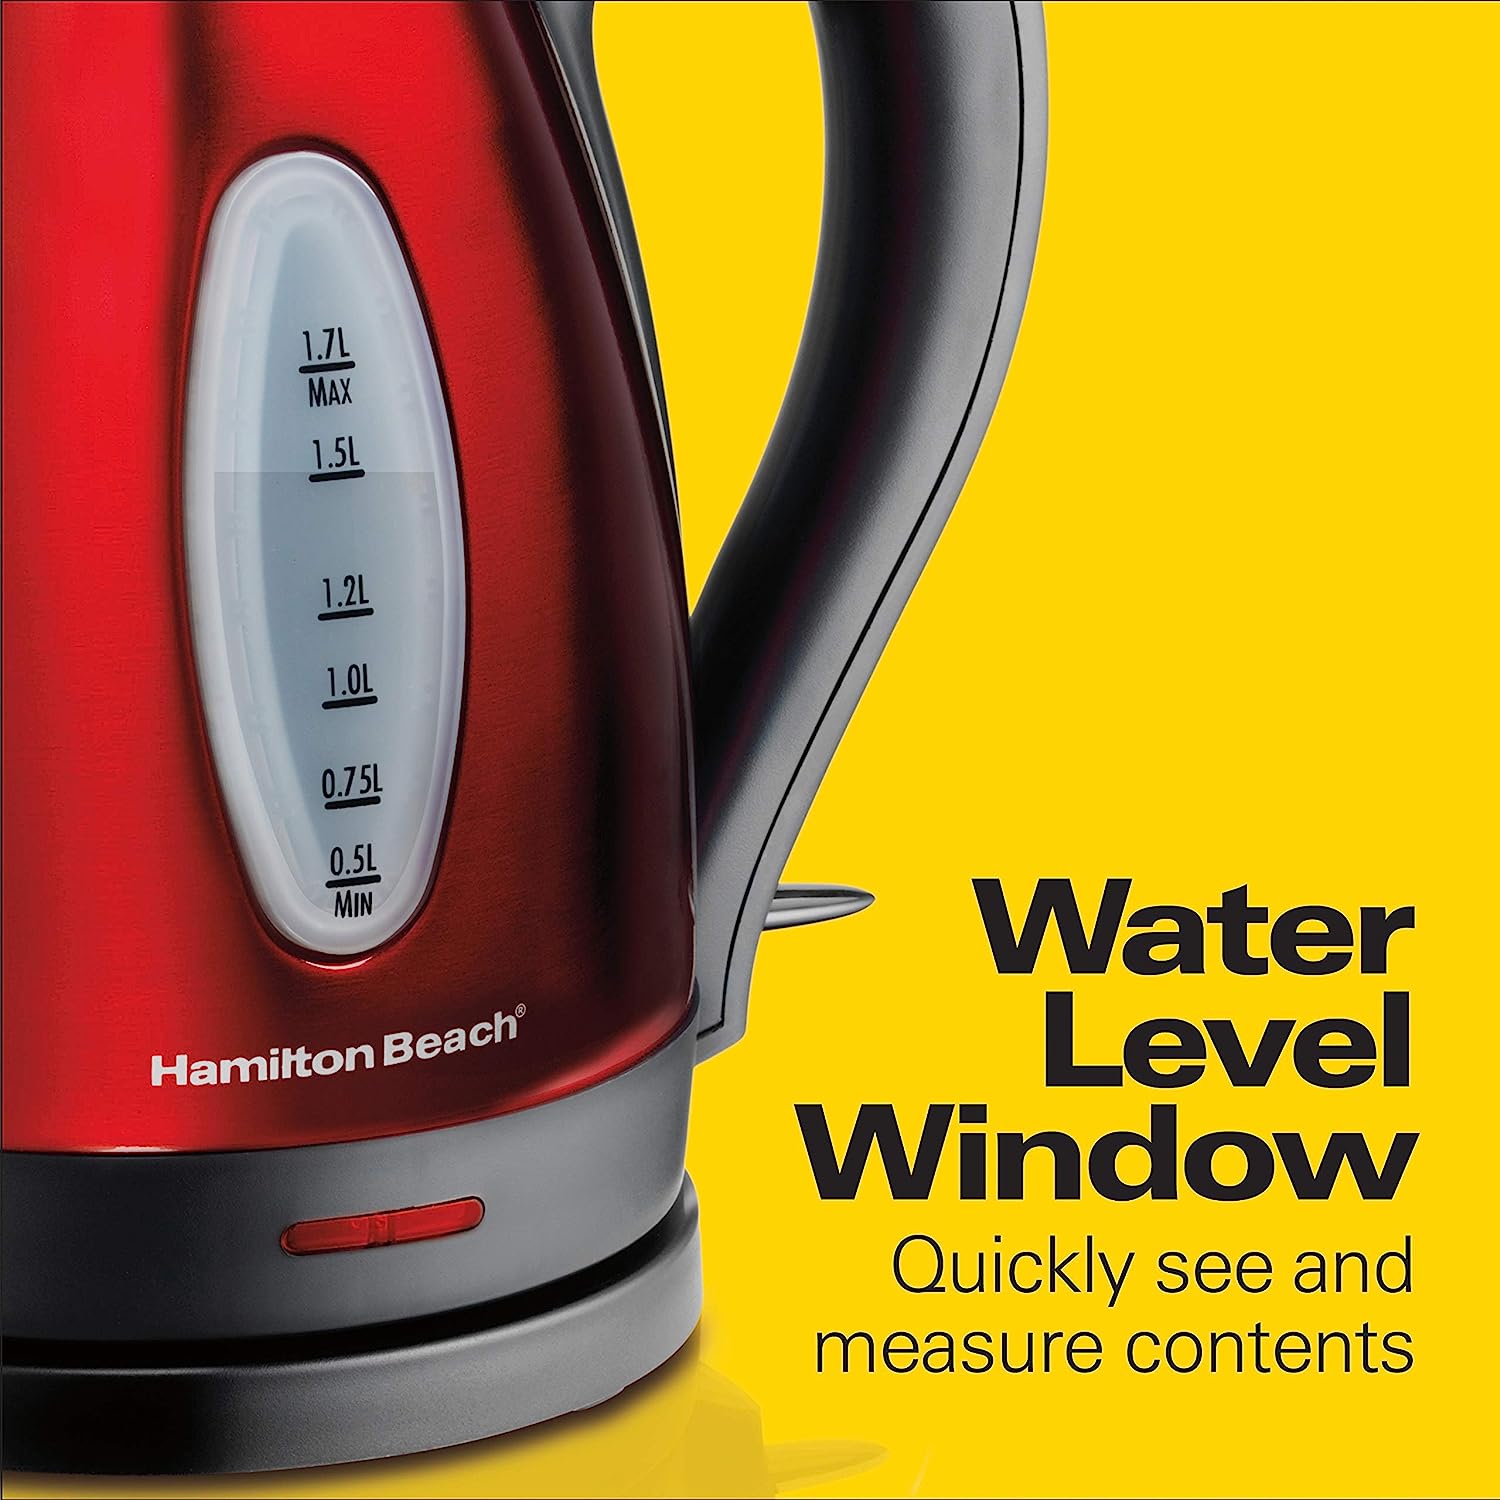 https://bigbigmart.com/wp-content/uploads/2023/07/Hamilton-Beach-Electric-Tea-Kettle-Water-Boiler-Heater-1.7-Liter-Cordless-Serving-1500-Watts-for-Fast-Boiling-Auto-Shutoff-and-Boil-Dry-Protection-Red-408856.jpg